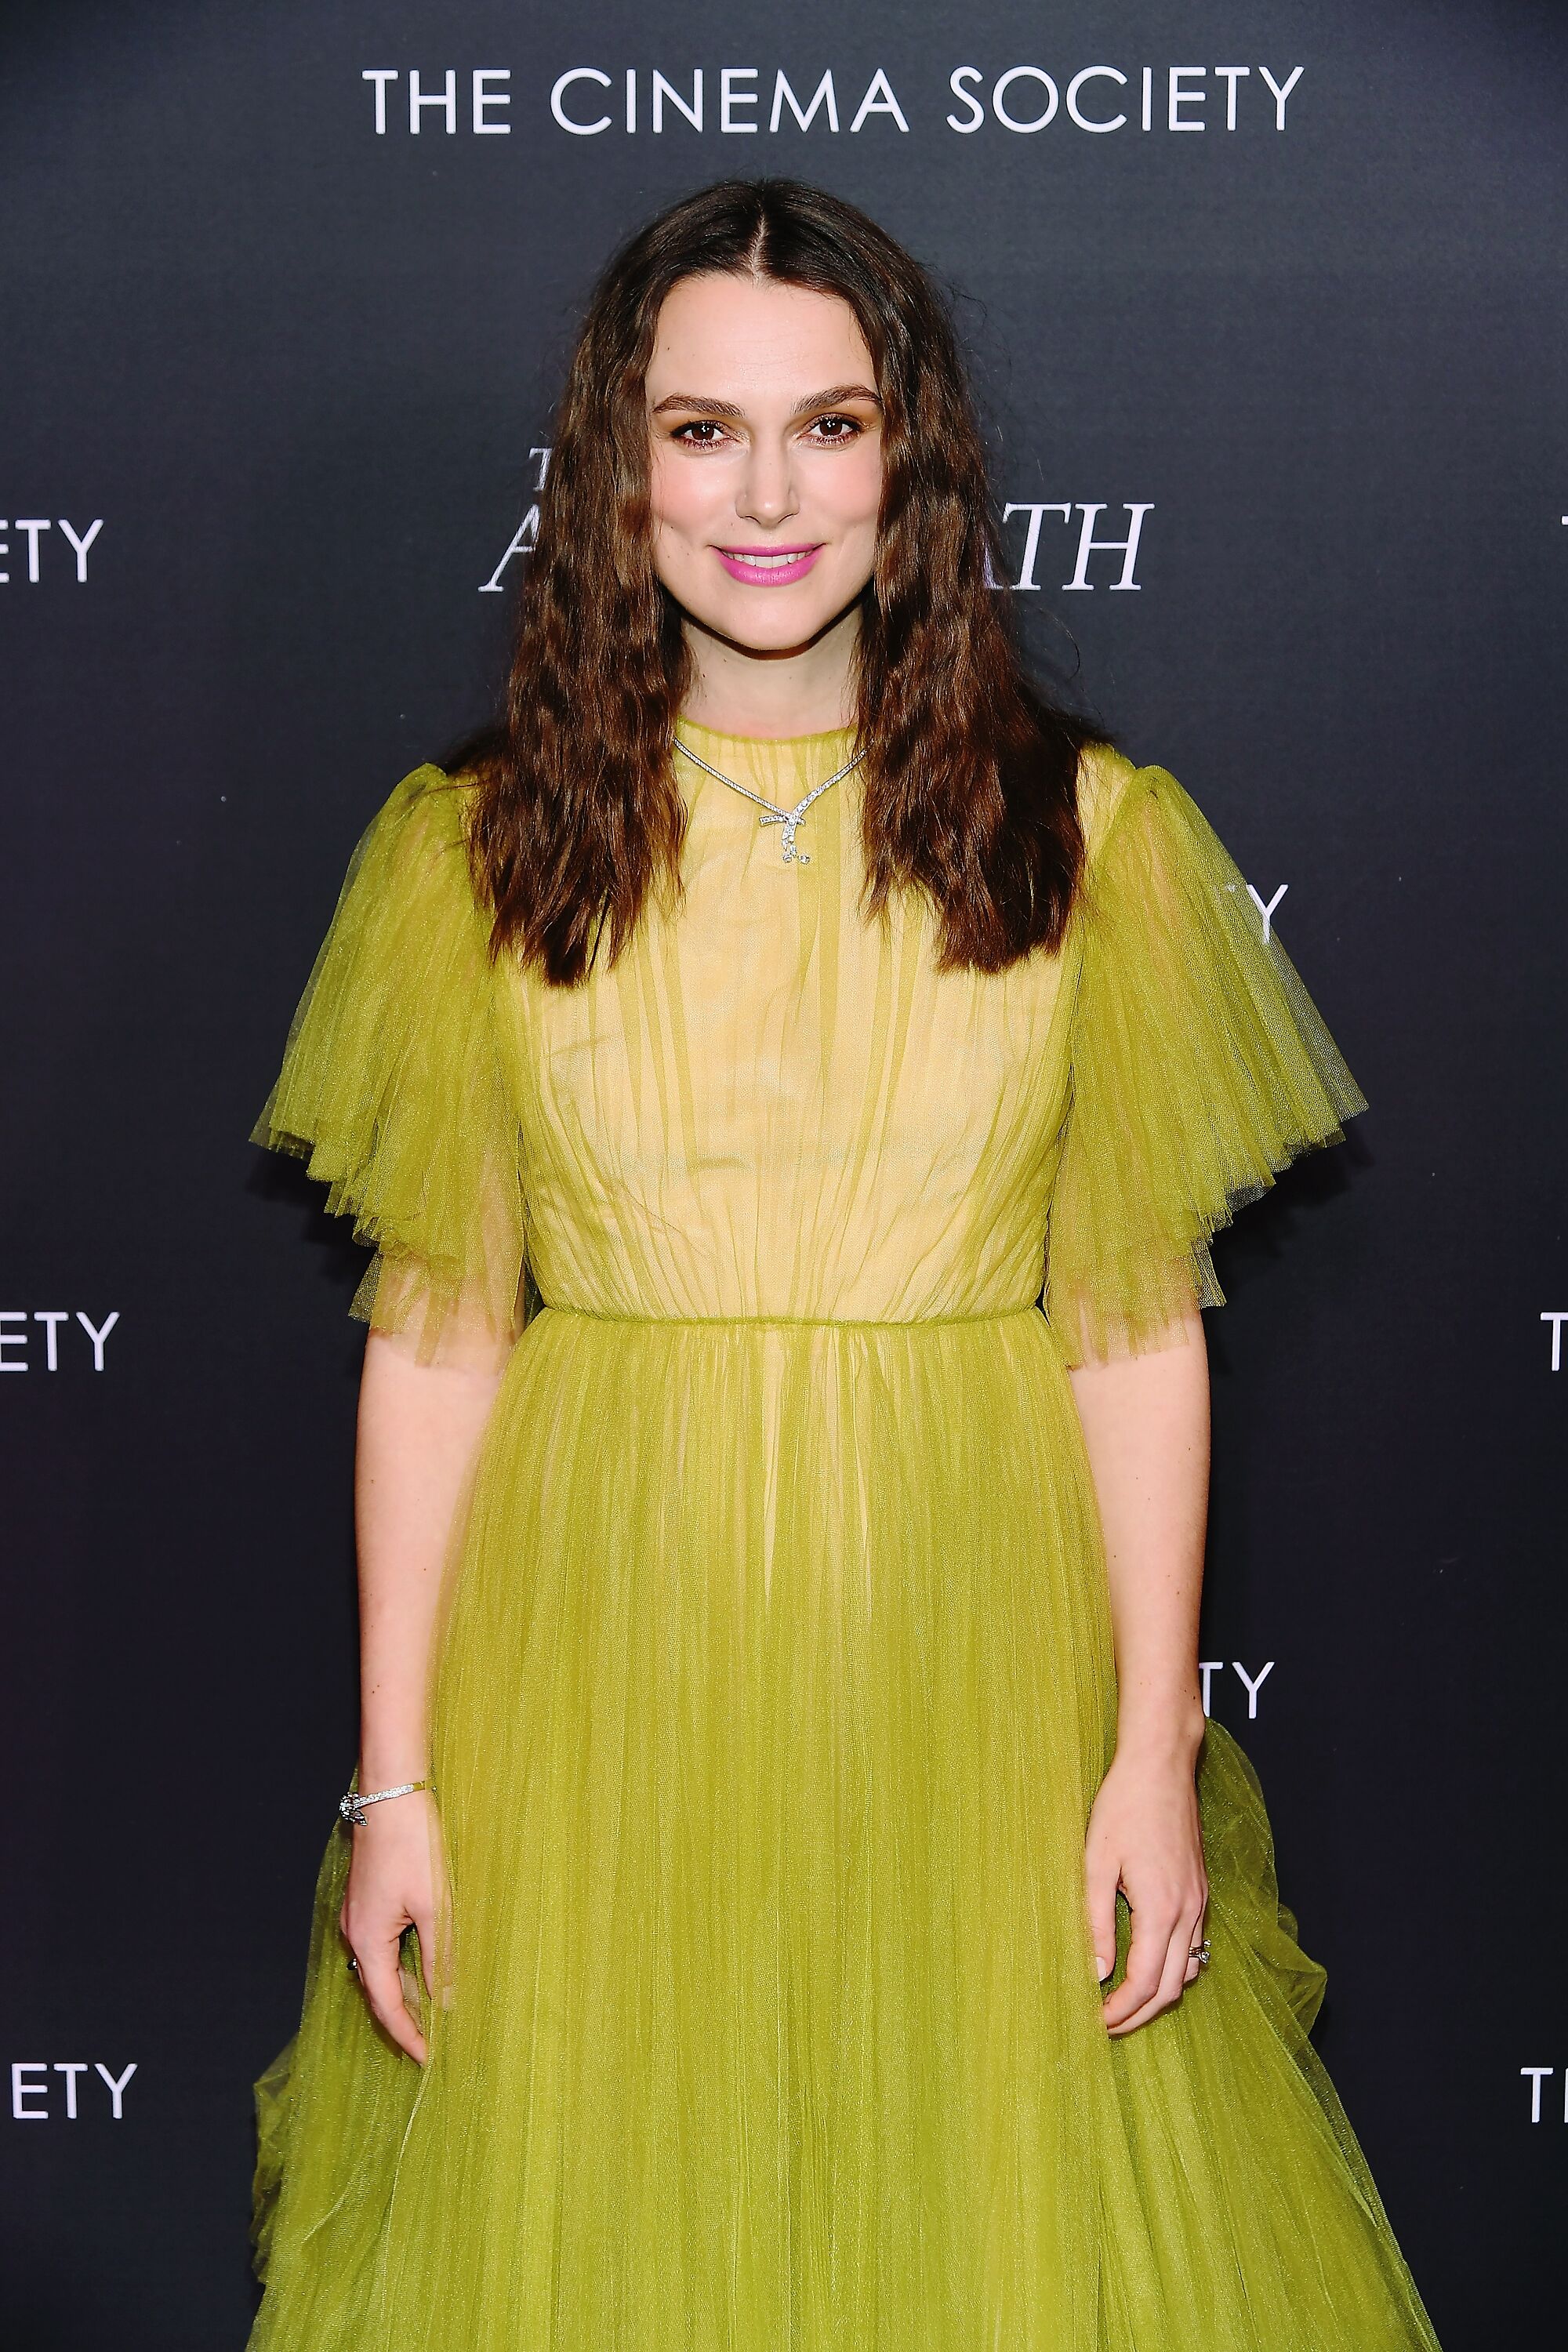 Keira Knightley at The Cimena Society event. | Source: Getty Images